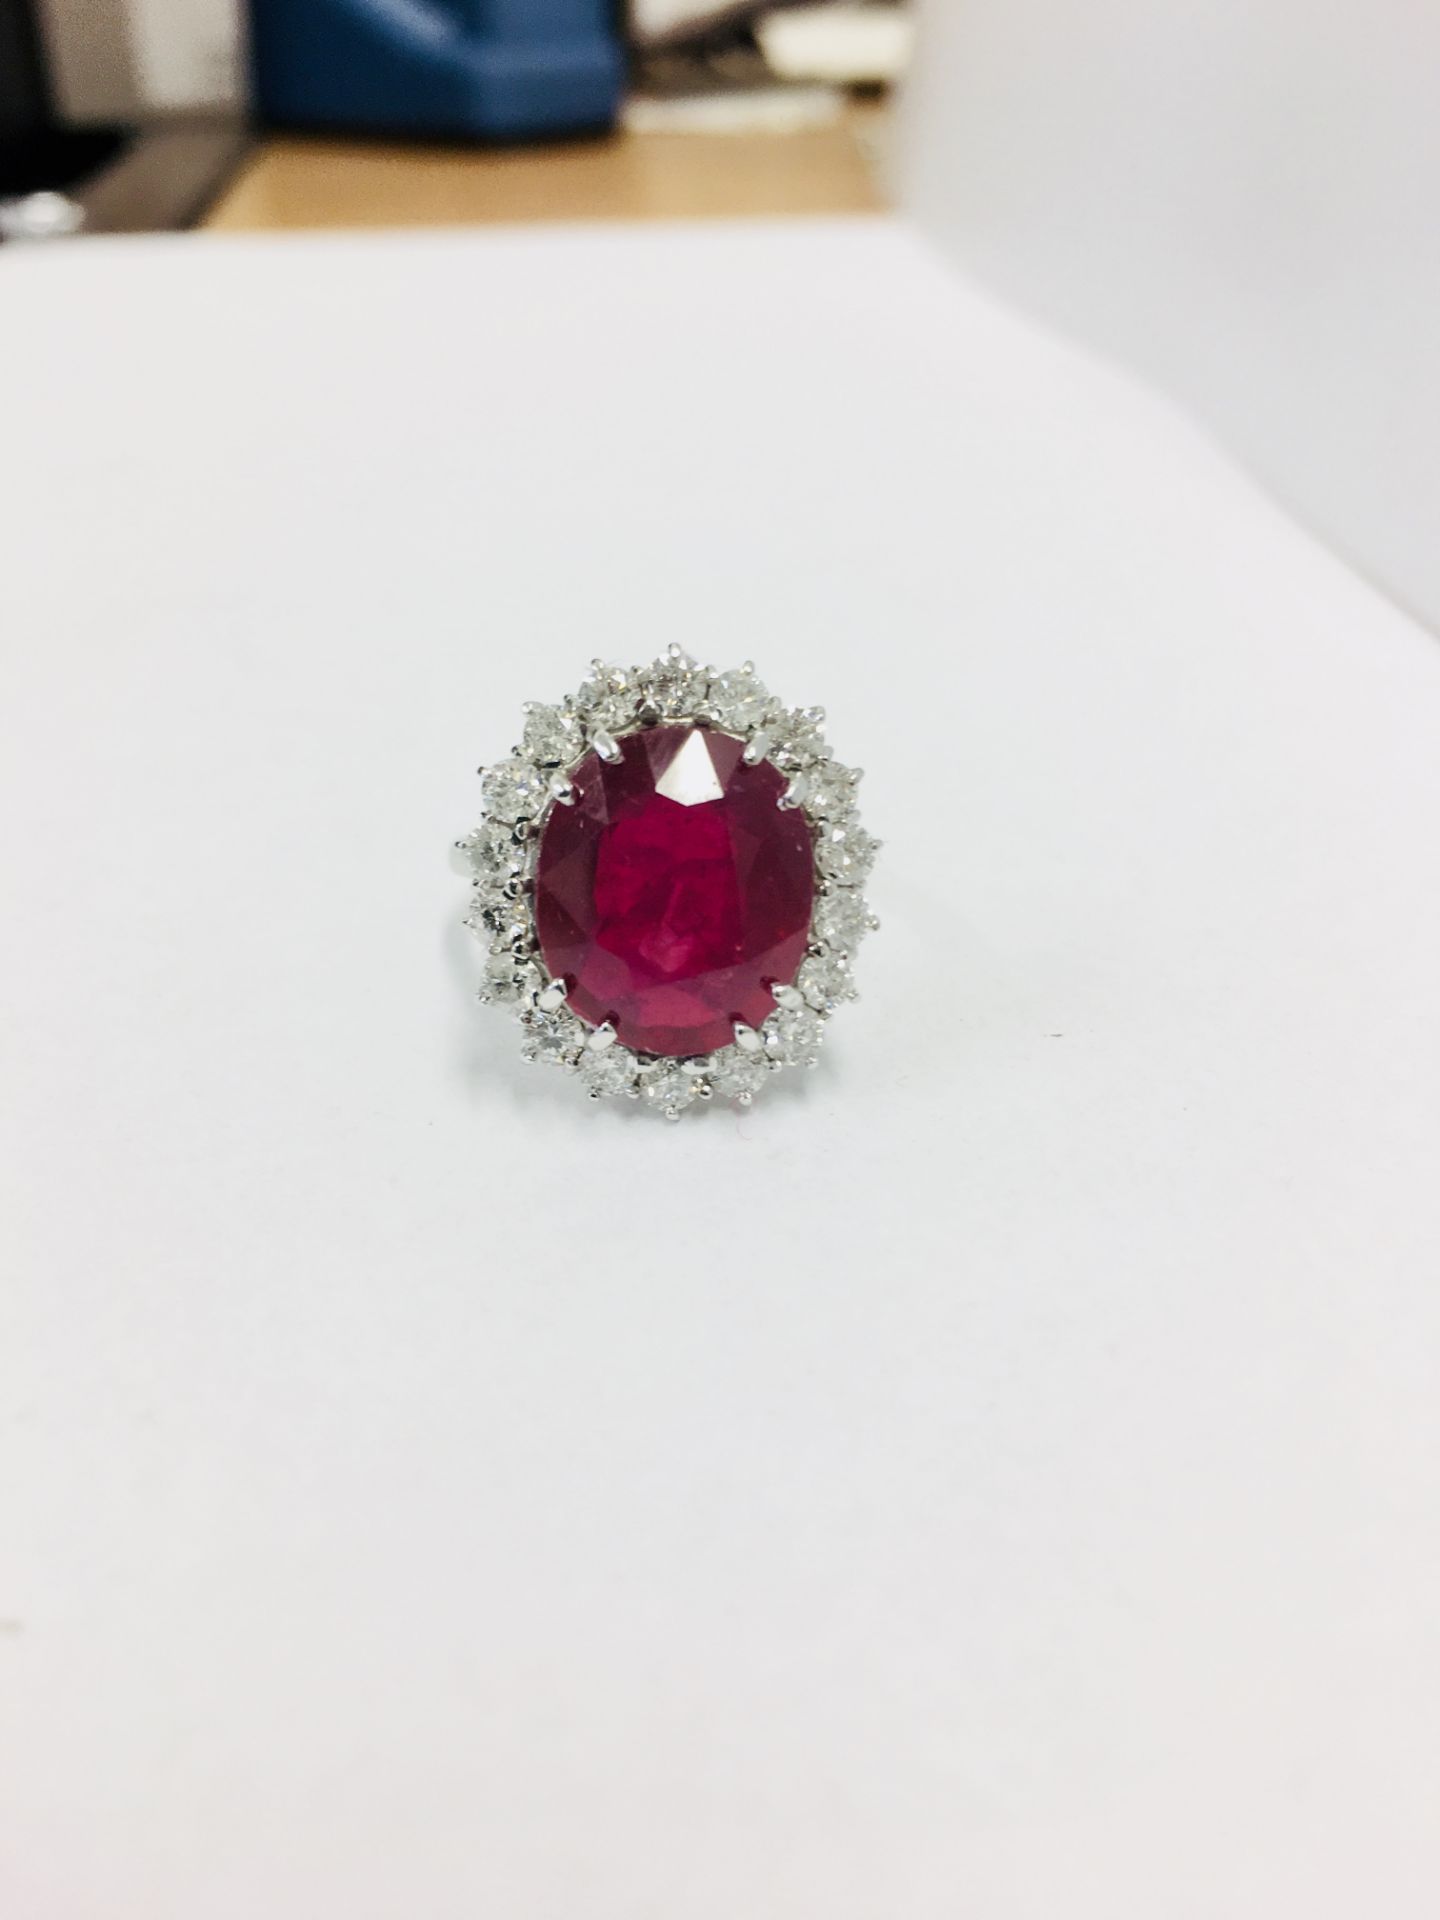 10Ct Ruby And Diamond Cluster Ring.